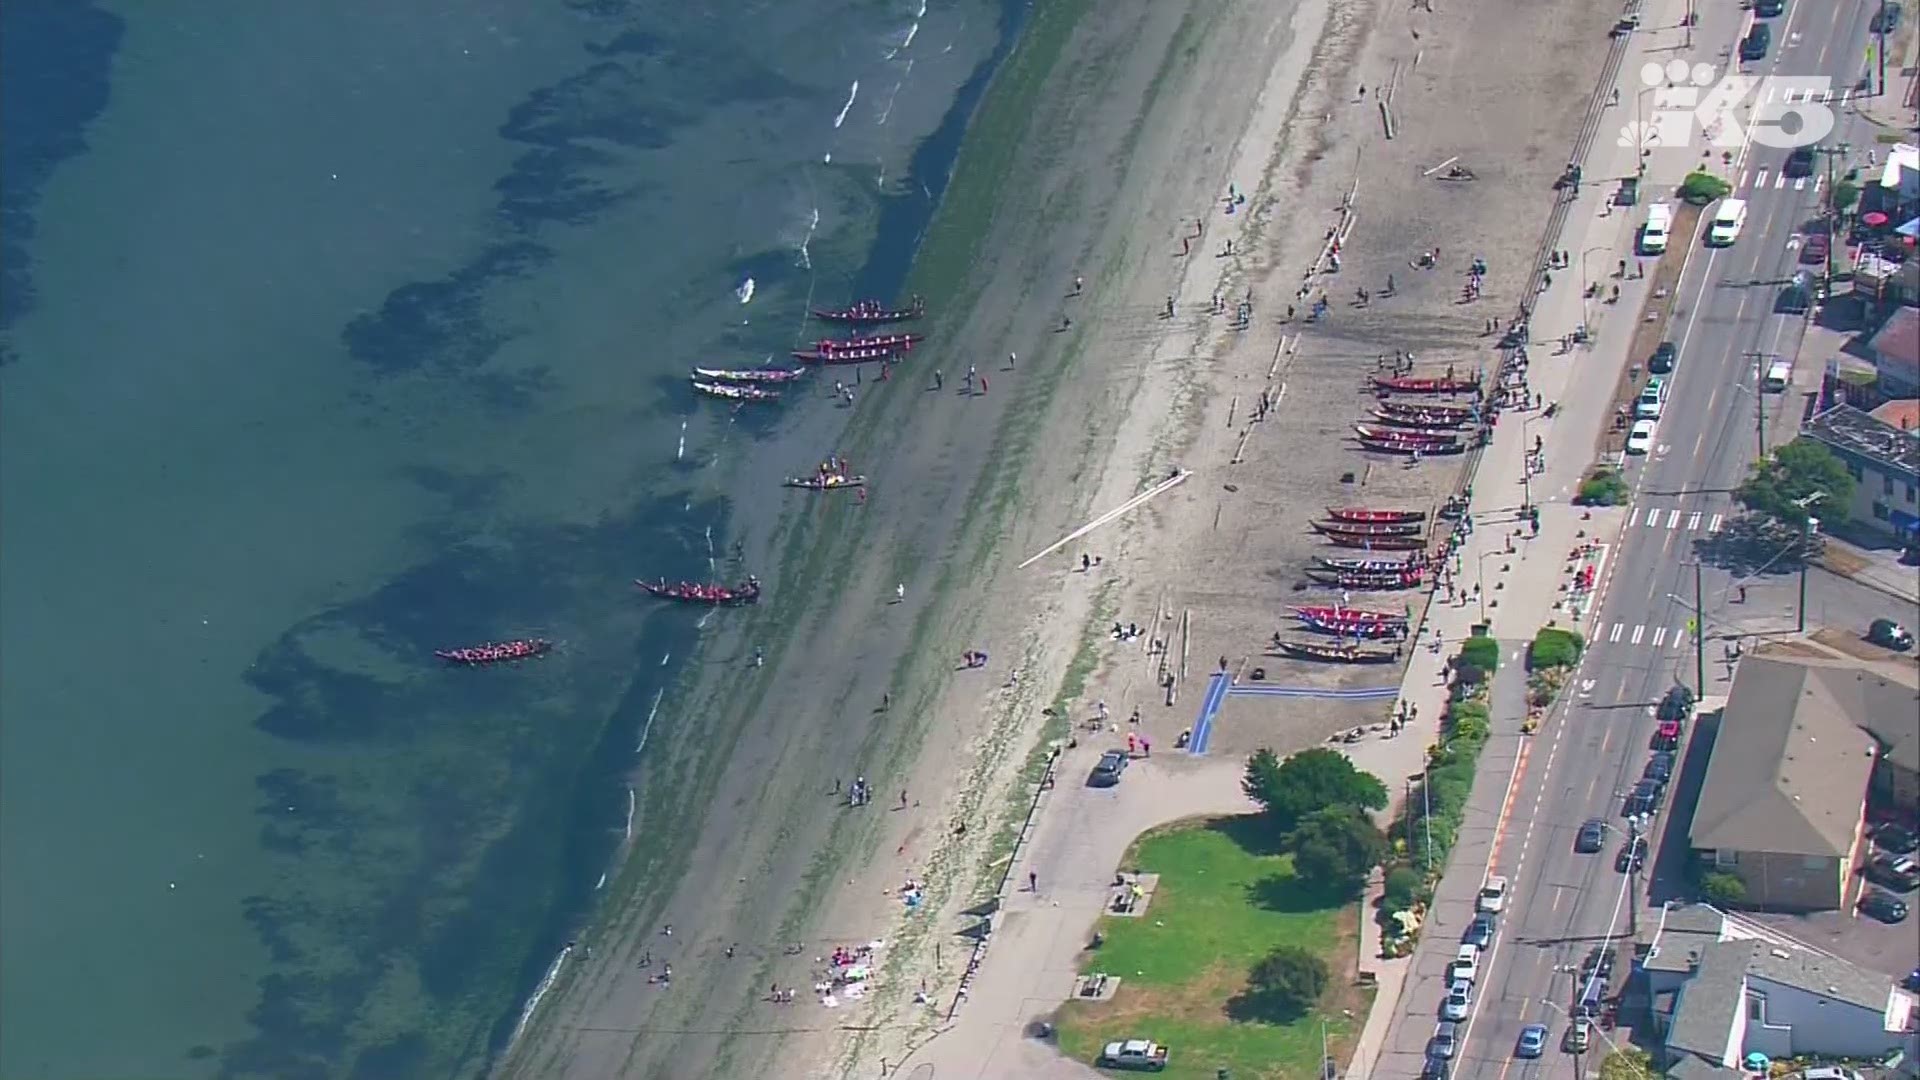 The annual event started at Seattle's Alki Beach.